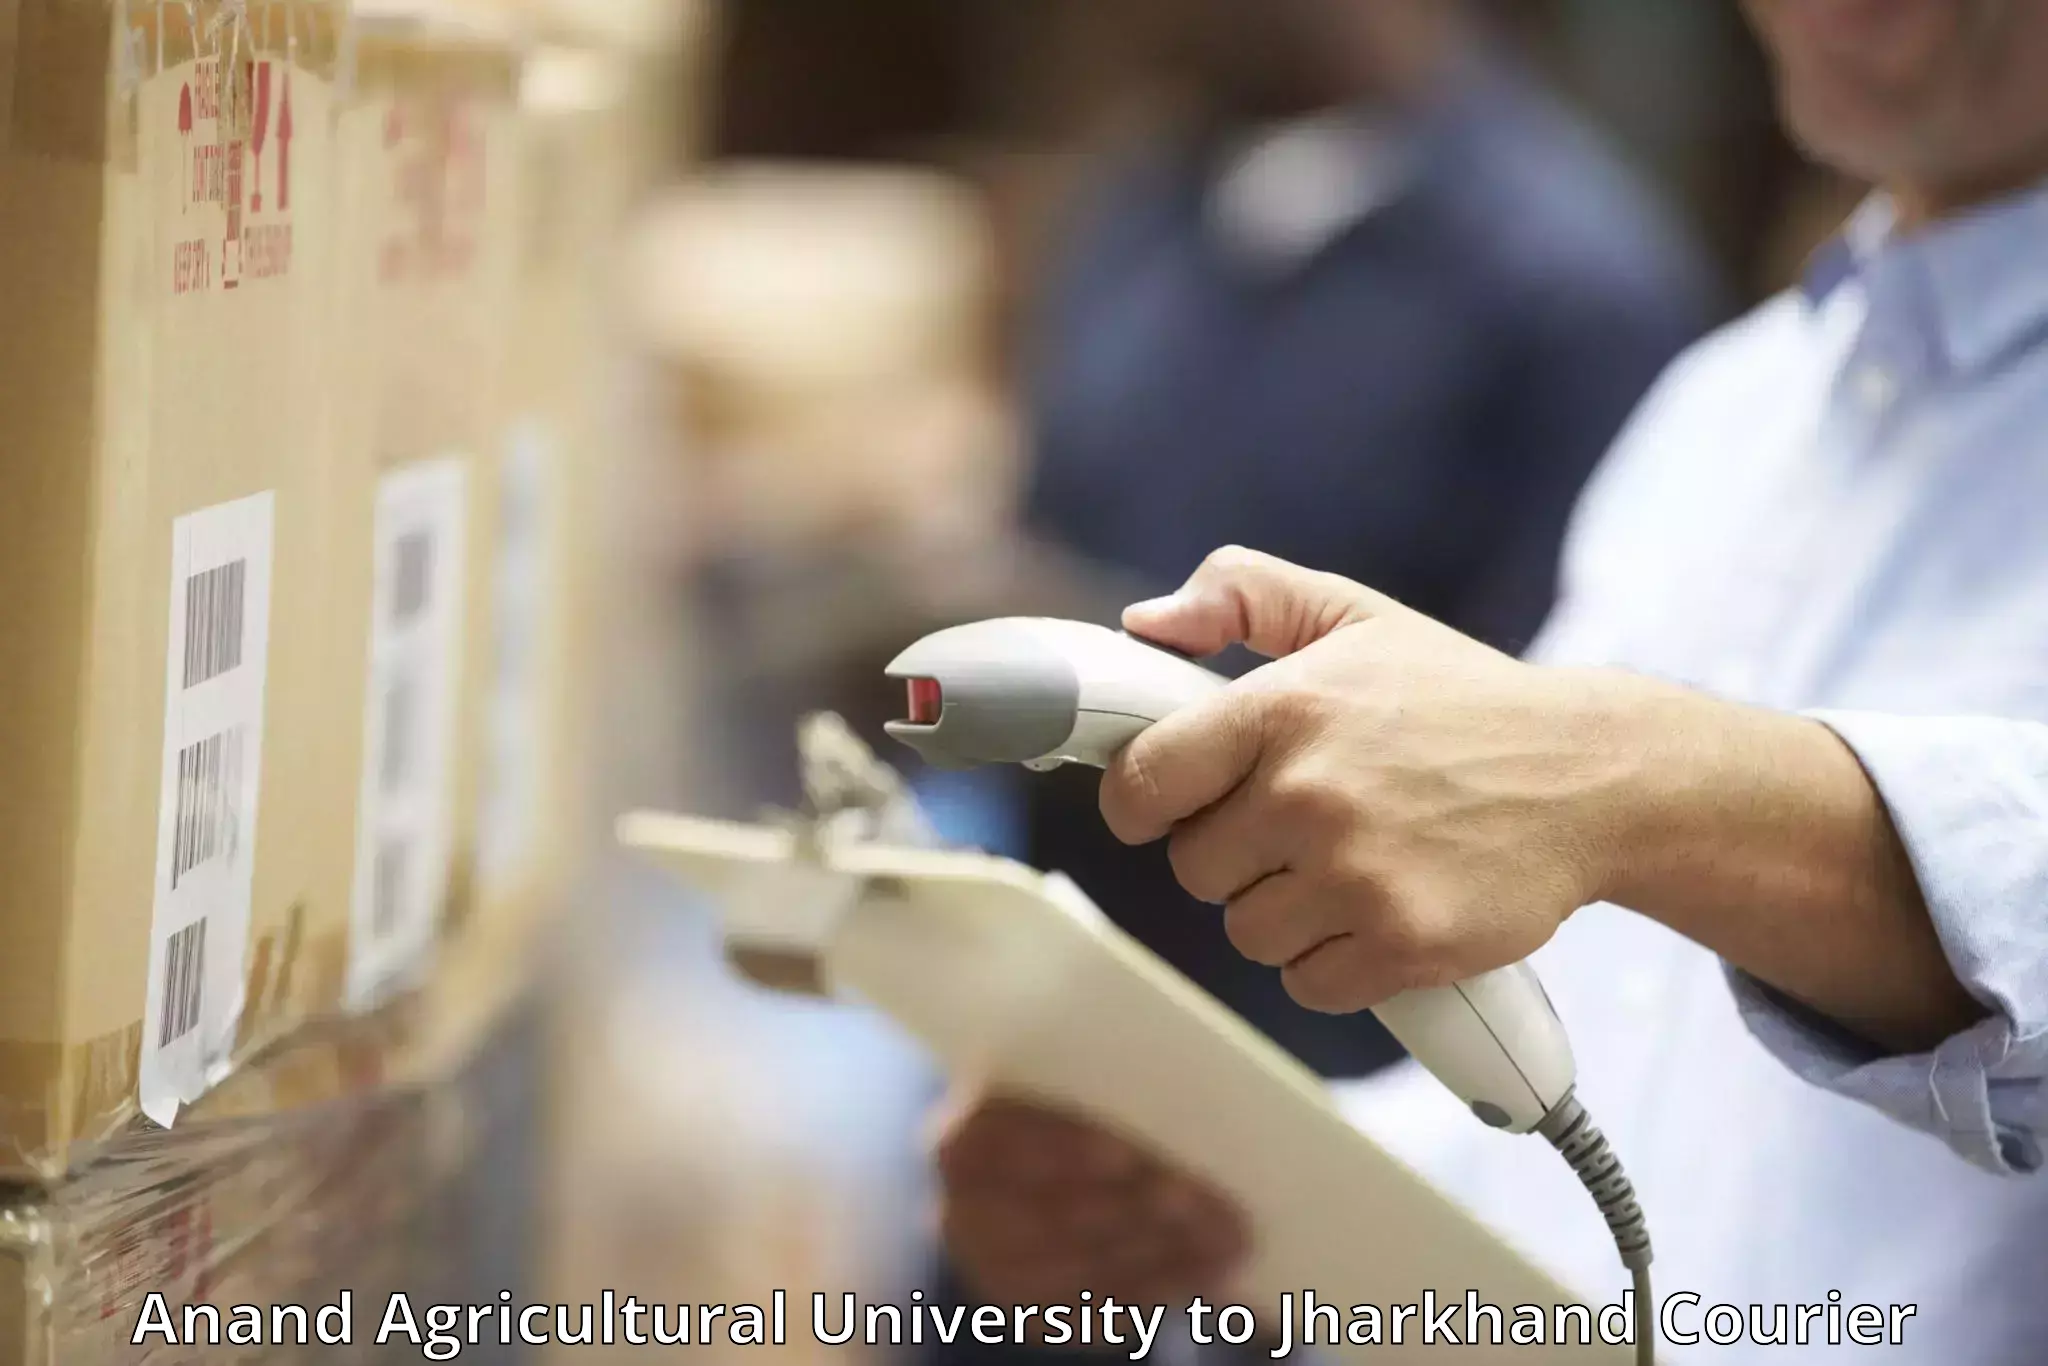 Hassle-free luggage shipping Anand Agricultural University to Medininagar